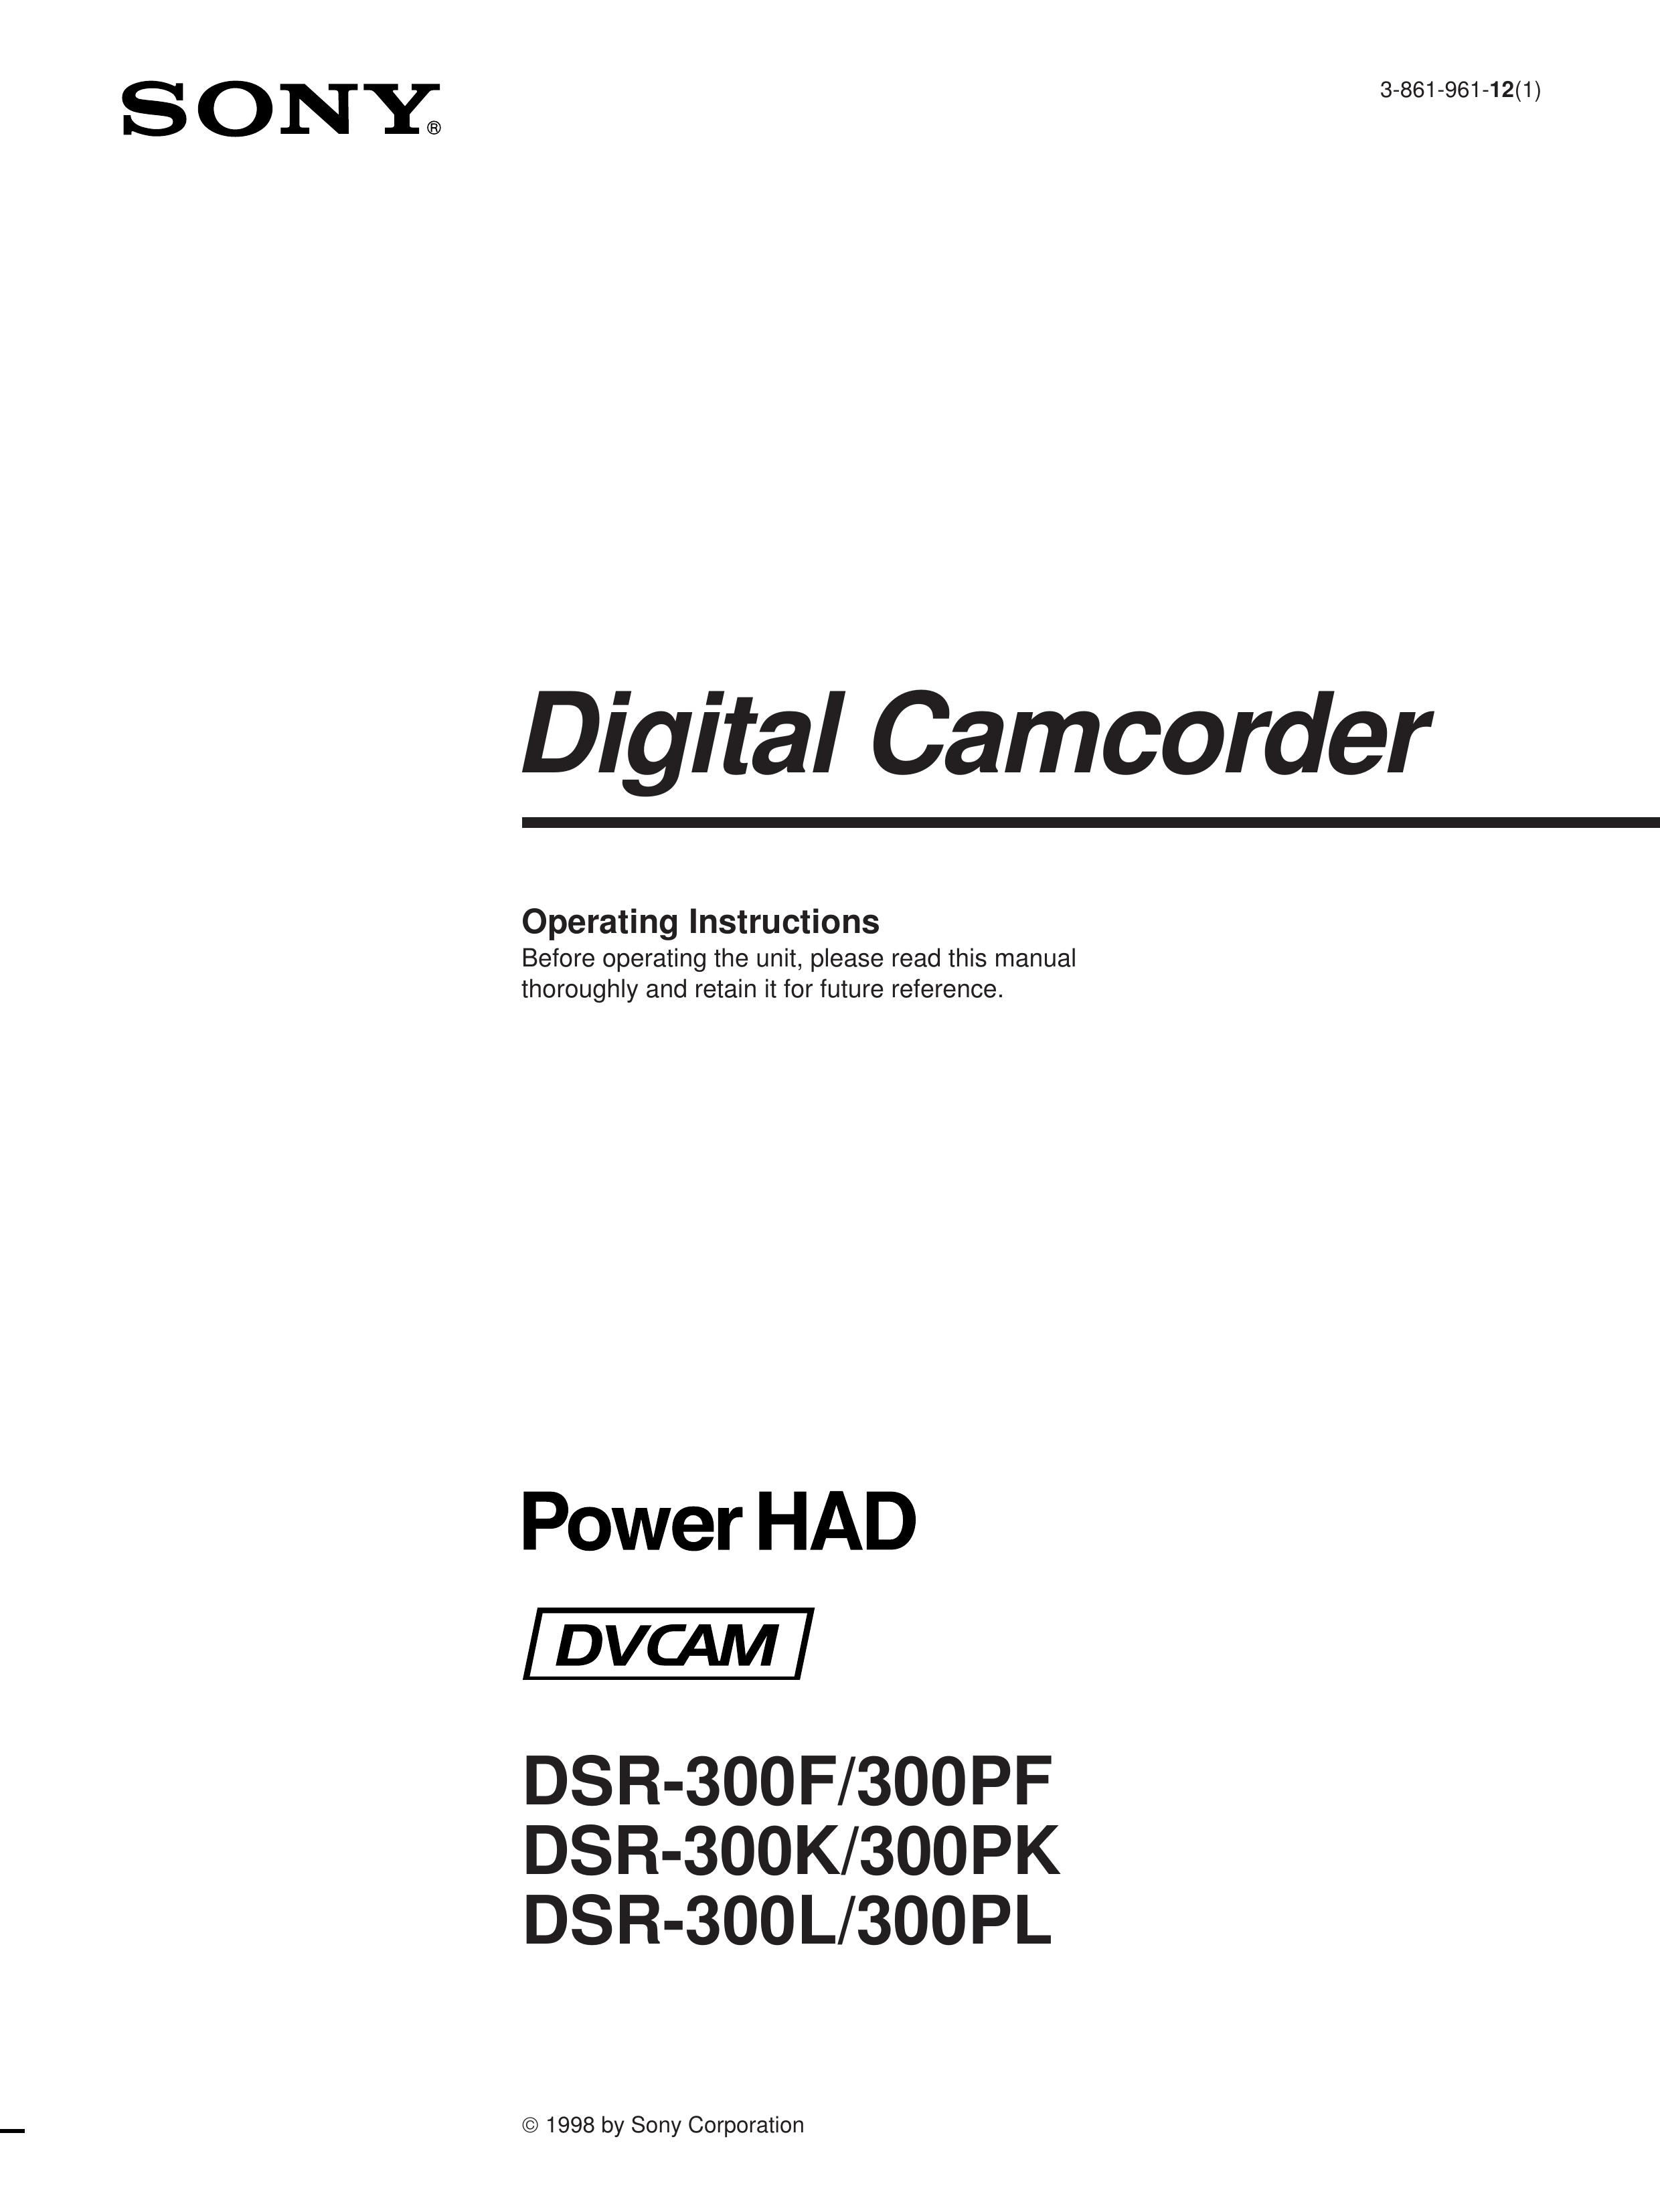 Sony 300PF Camcorder User Manual